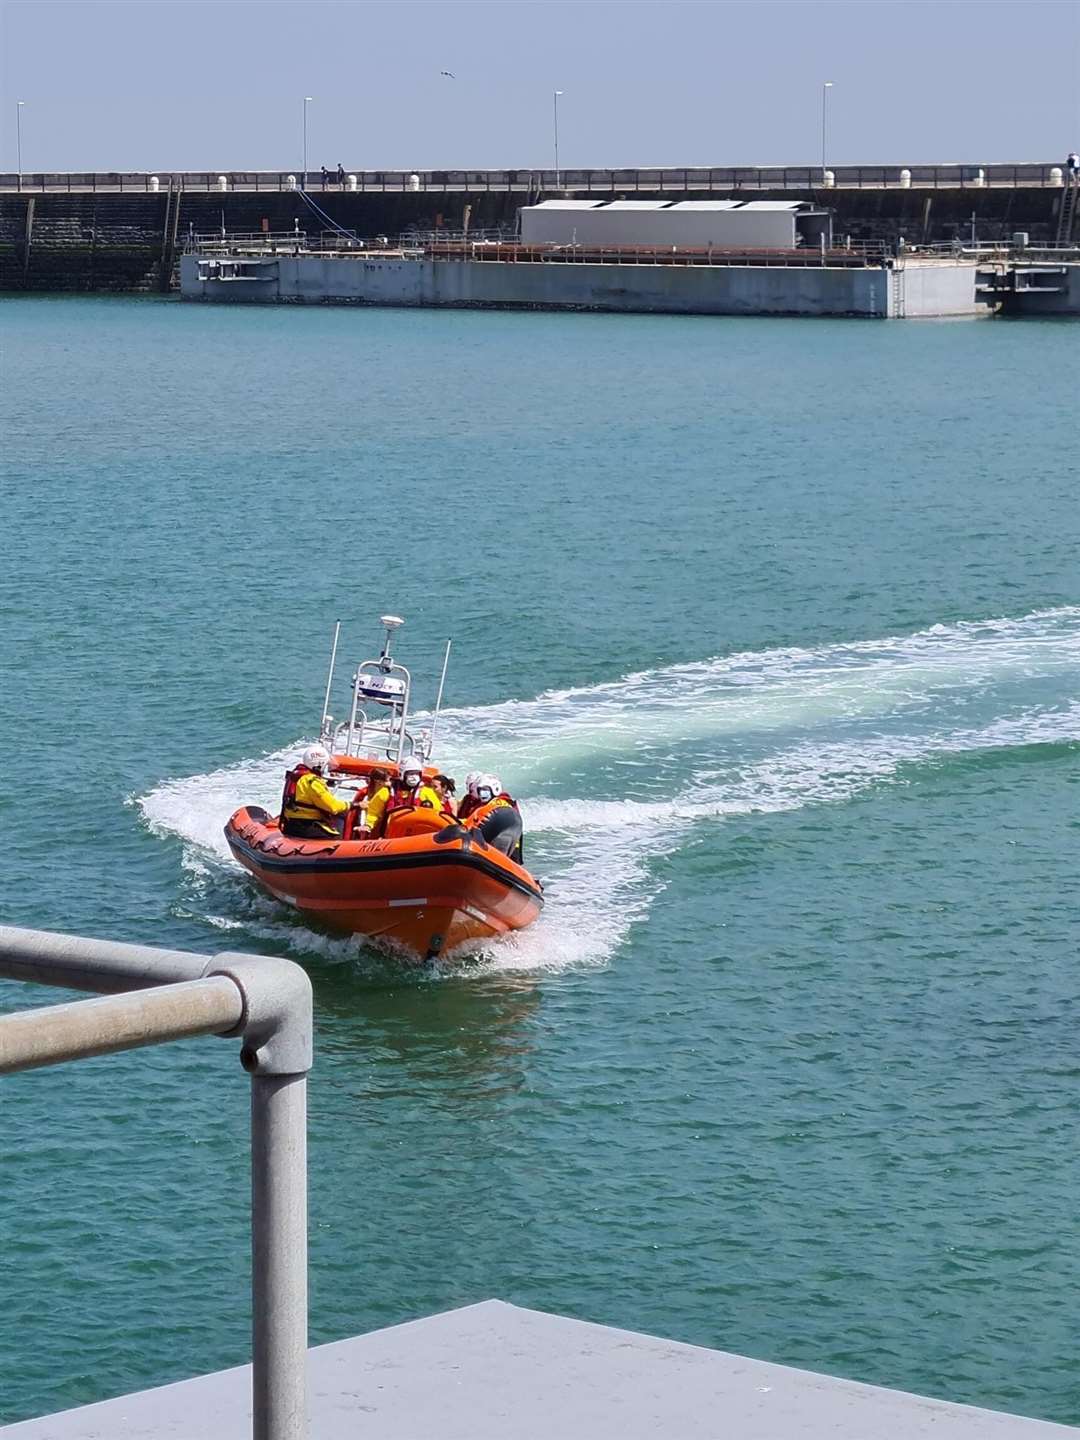 The Ramsgate inshore lifeboat returning the stranded family to the safety of the station. Picture: RNLI/Phil Mace